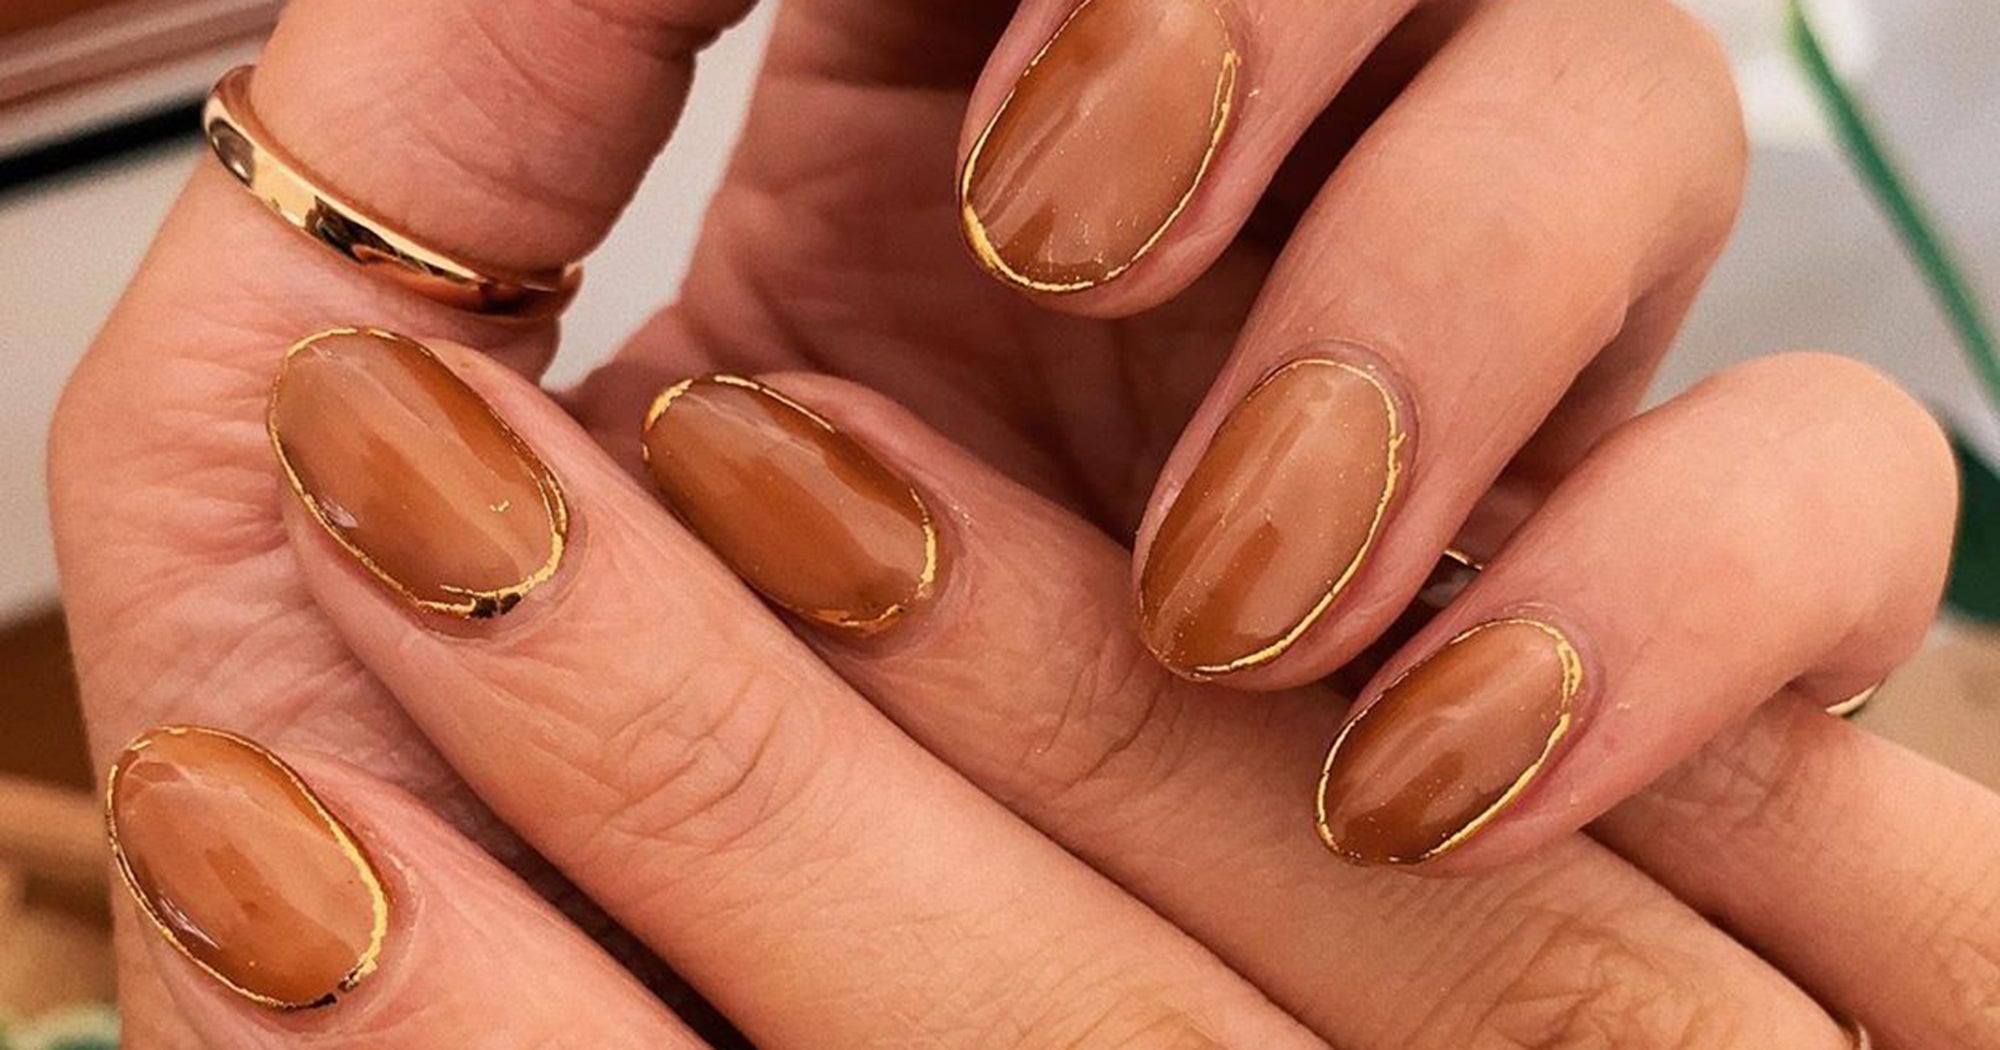 1. Simple and Chic Nail Art Ideas for Short Nails - wide 6